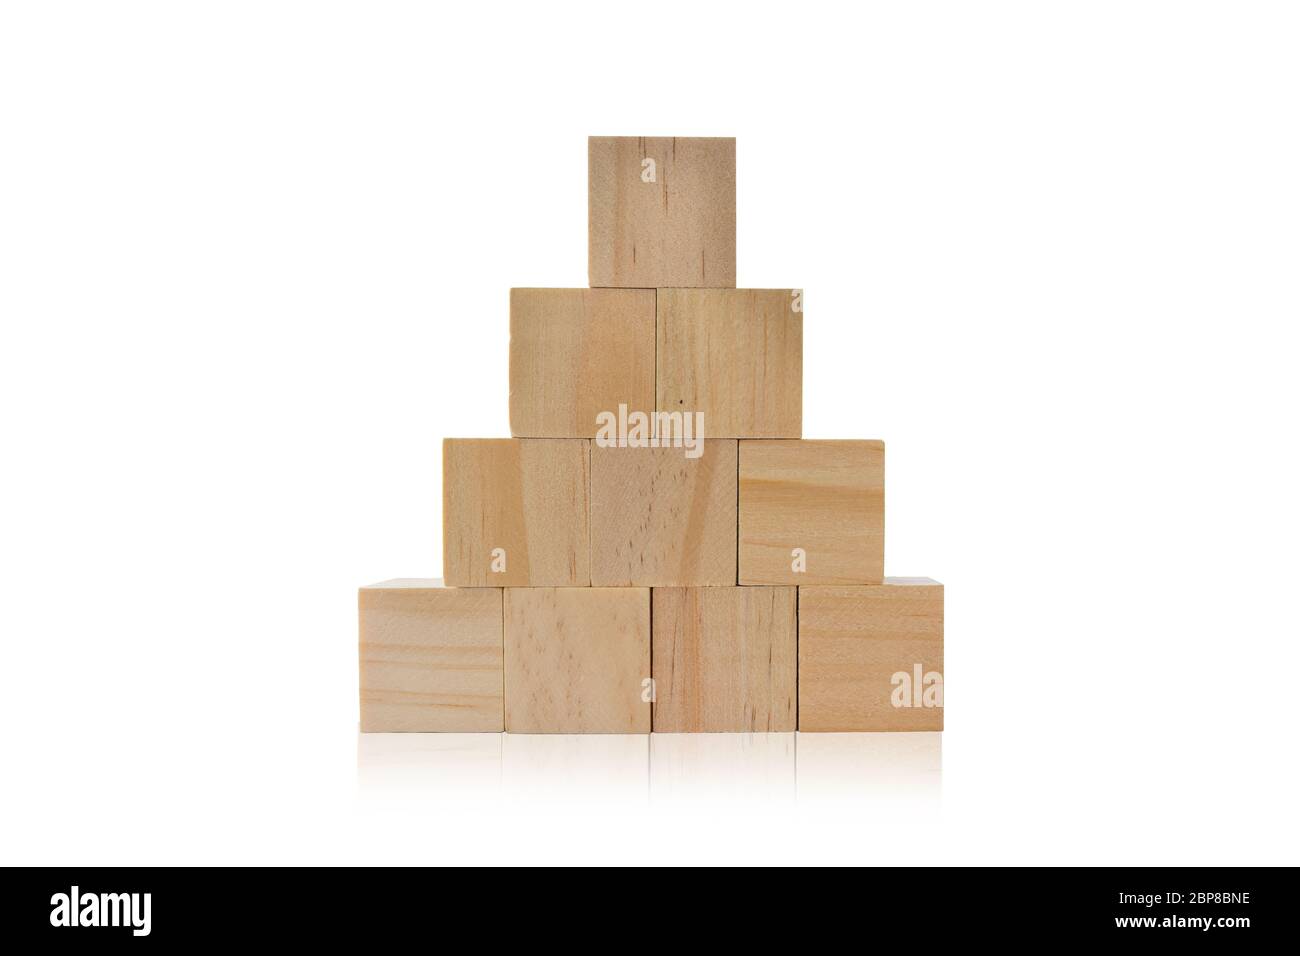 Wood cube stacking as step stair isolated on white background. Stock Photo